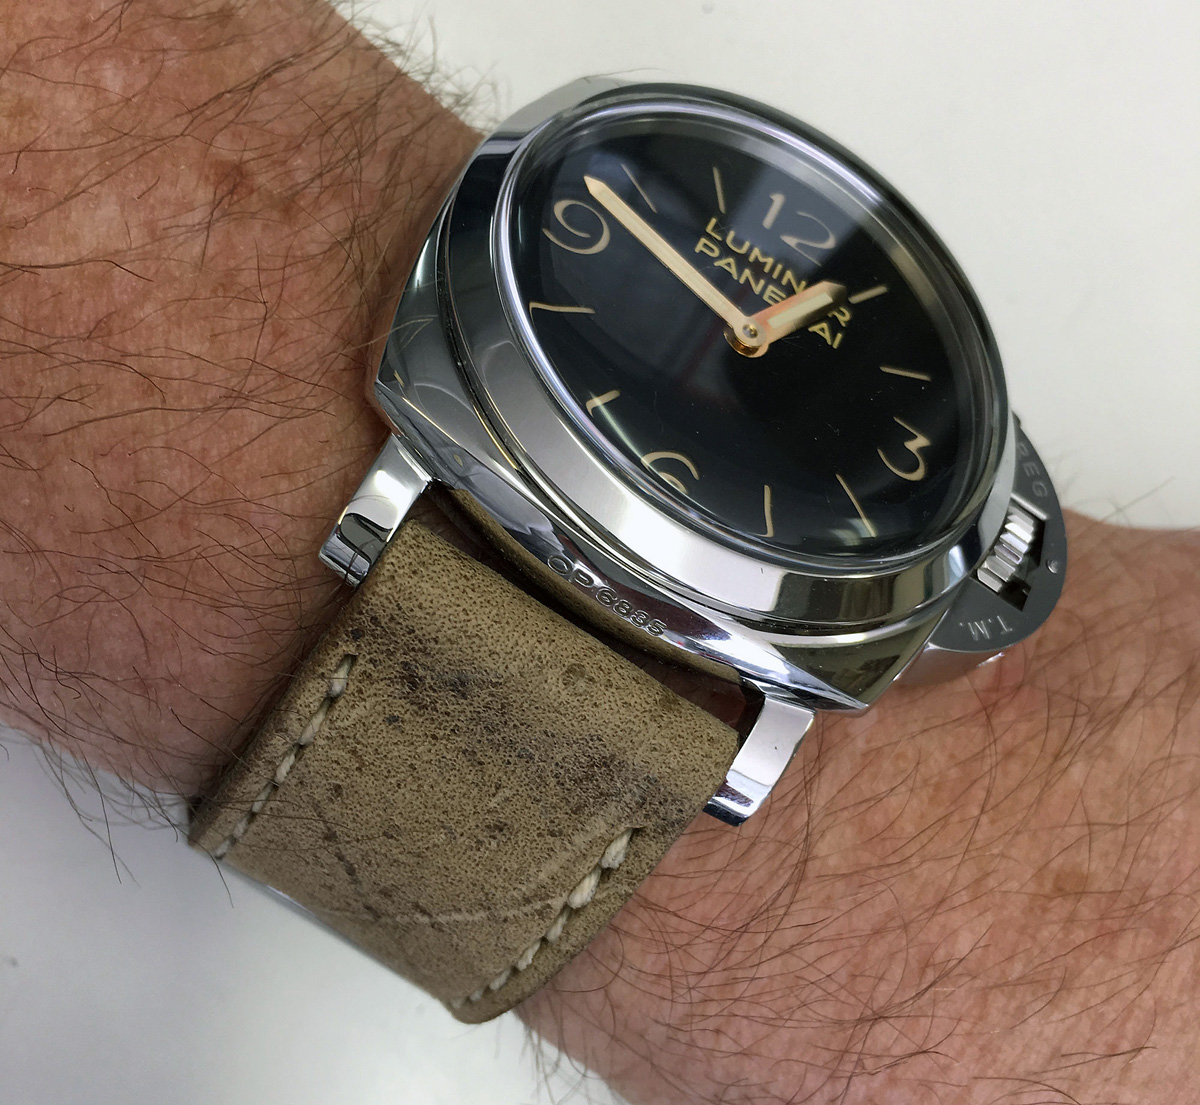 Modified Panerai 372 on African Kudu leather with natural stitching. © Steve Smedley